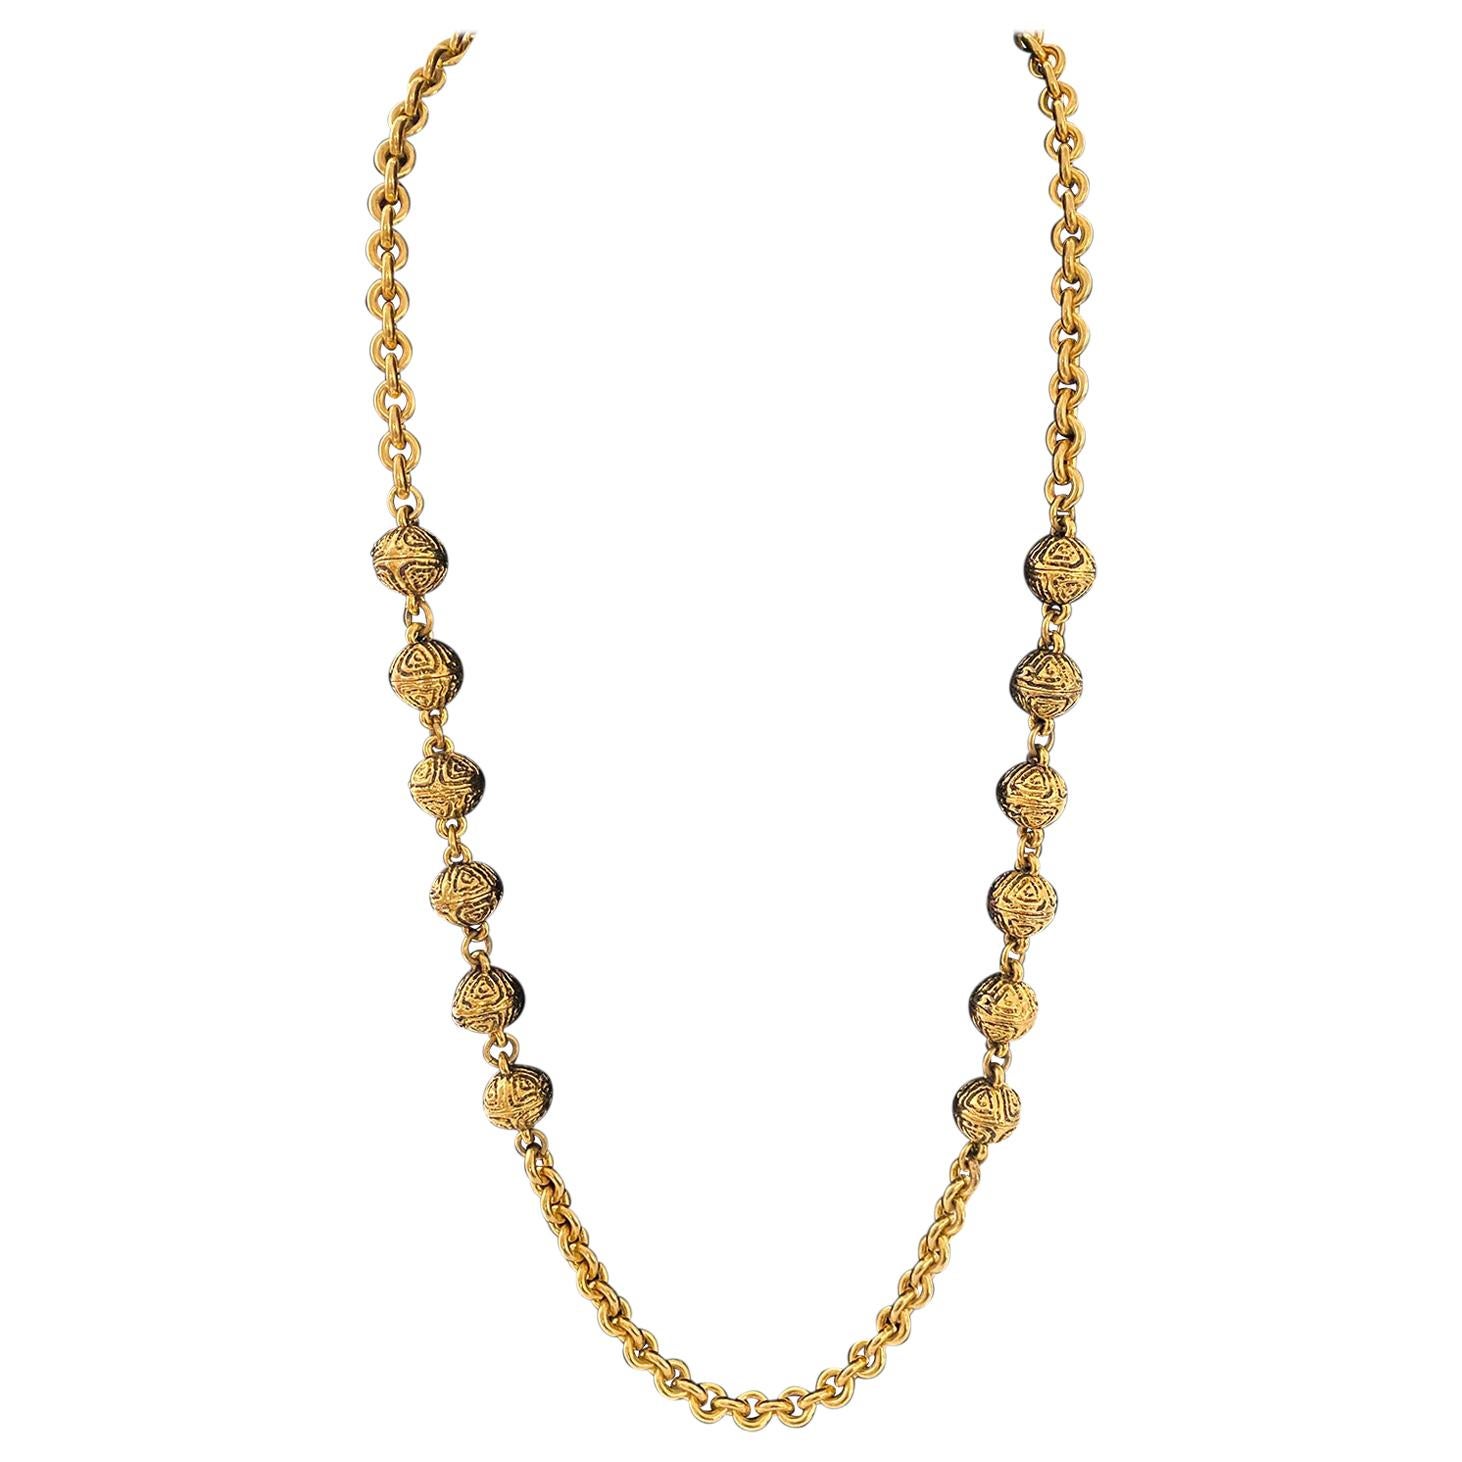 1985 Chanel Gold Tone Chain Link Necklace with Gilded Beads  For Sale